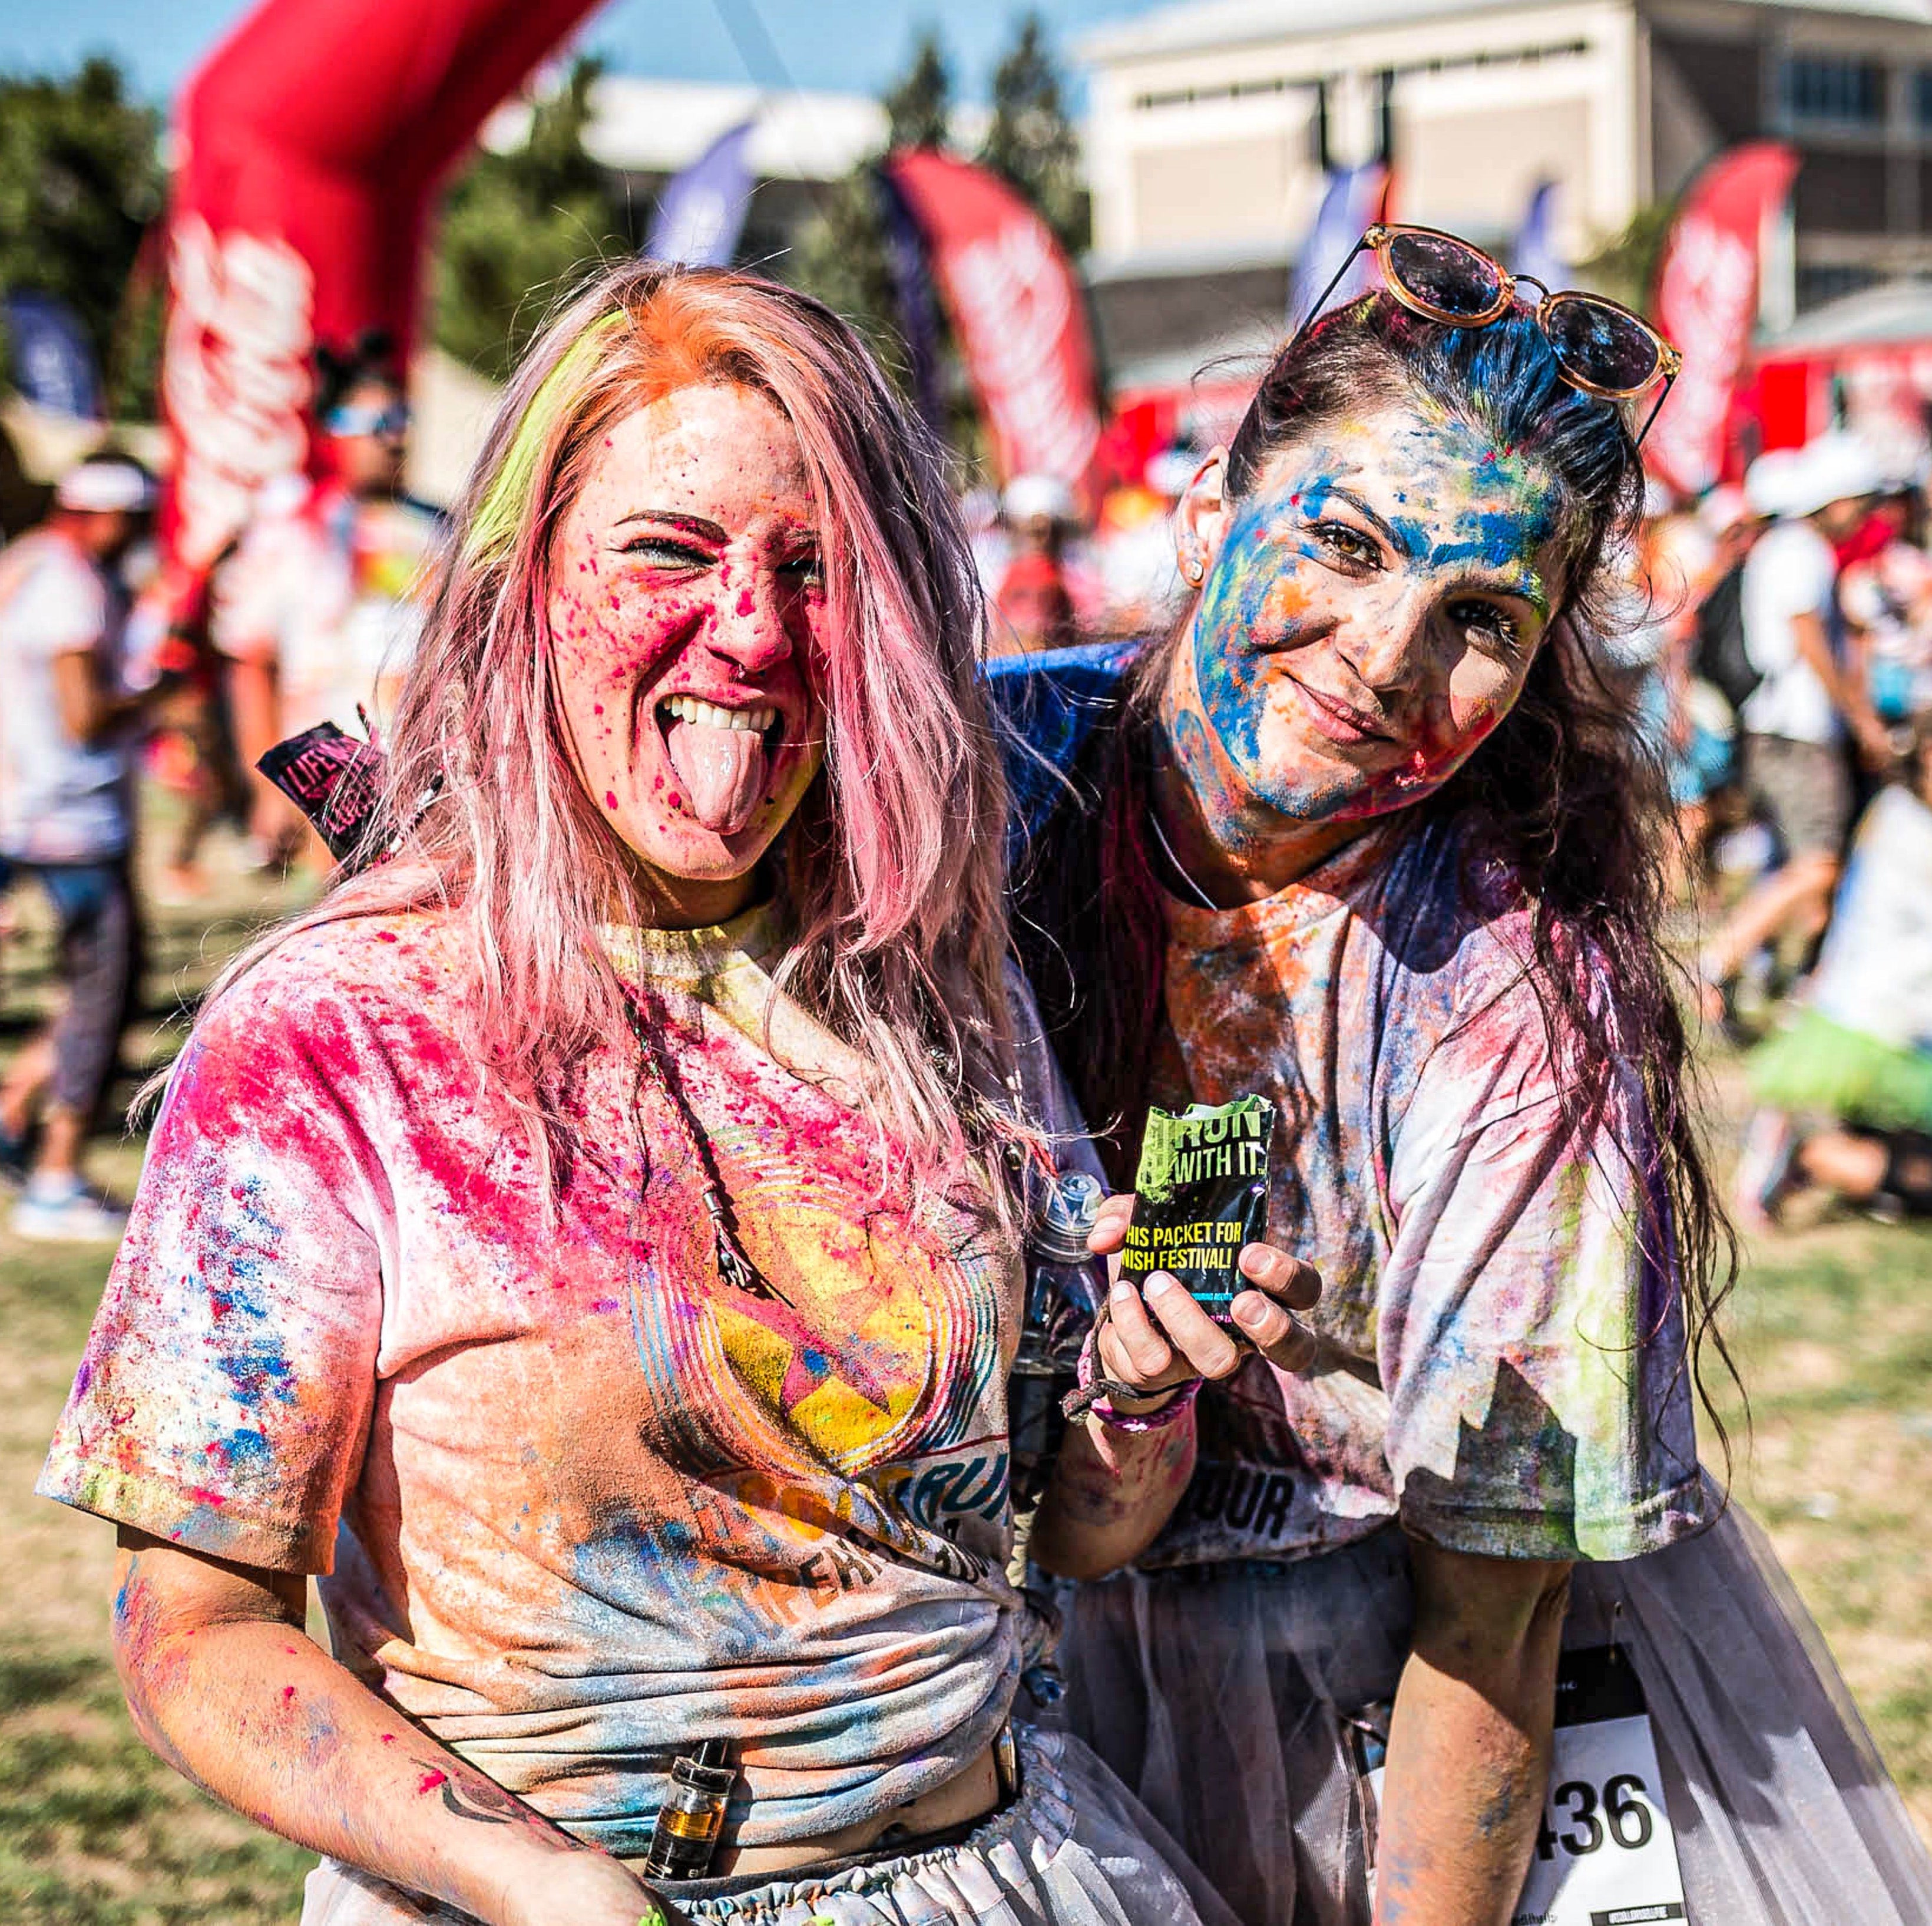 The Best Way to Throw Color Run Powder for a Fun and Safe Fundraising Event